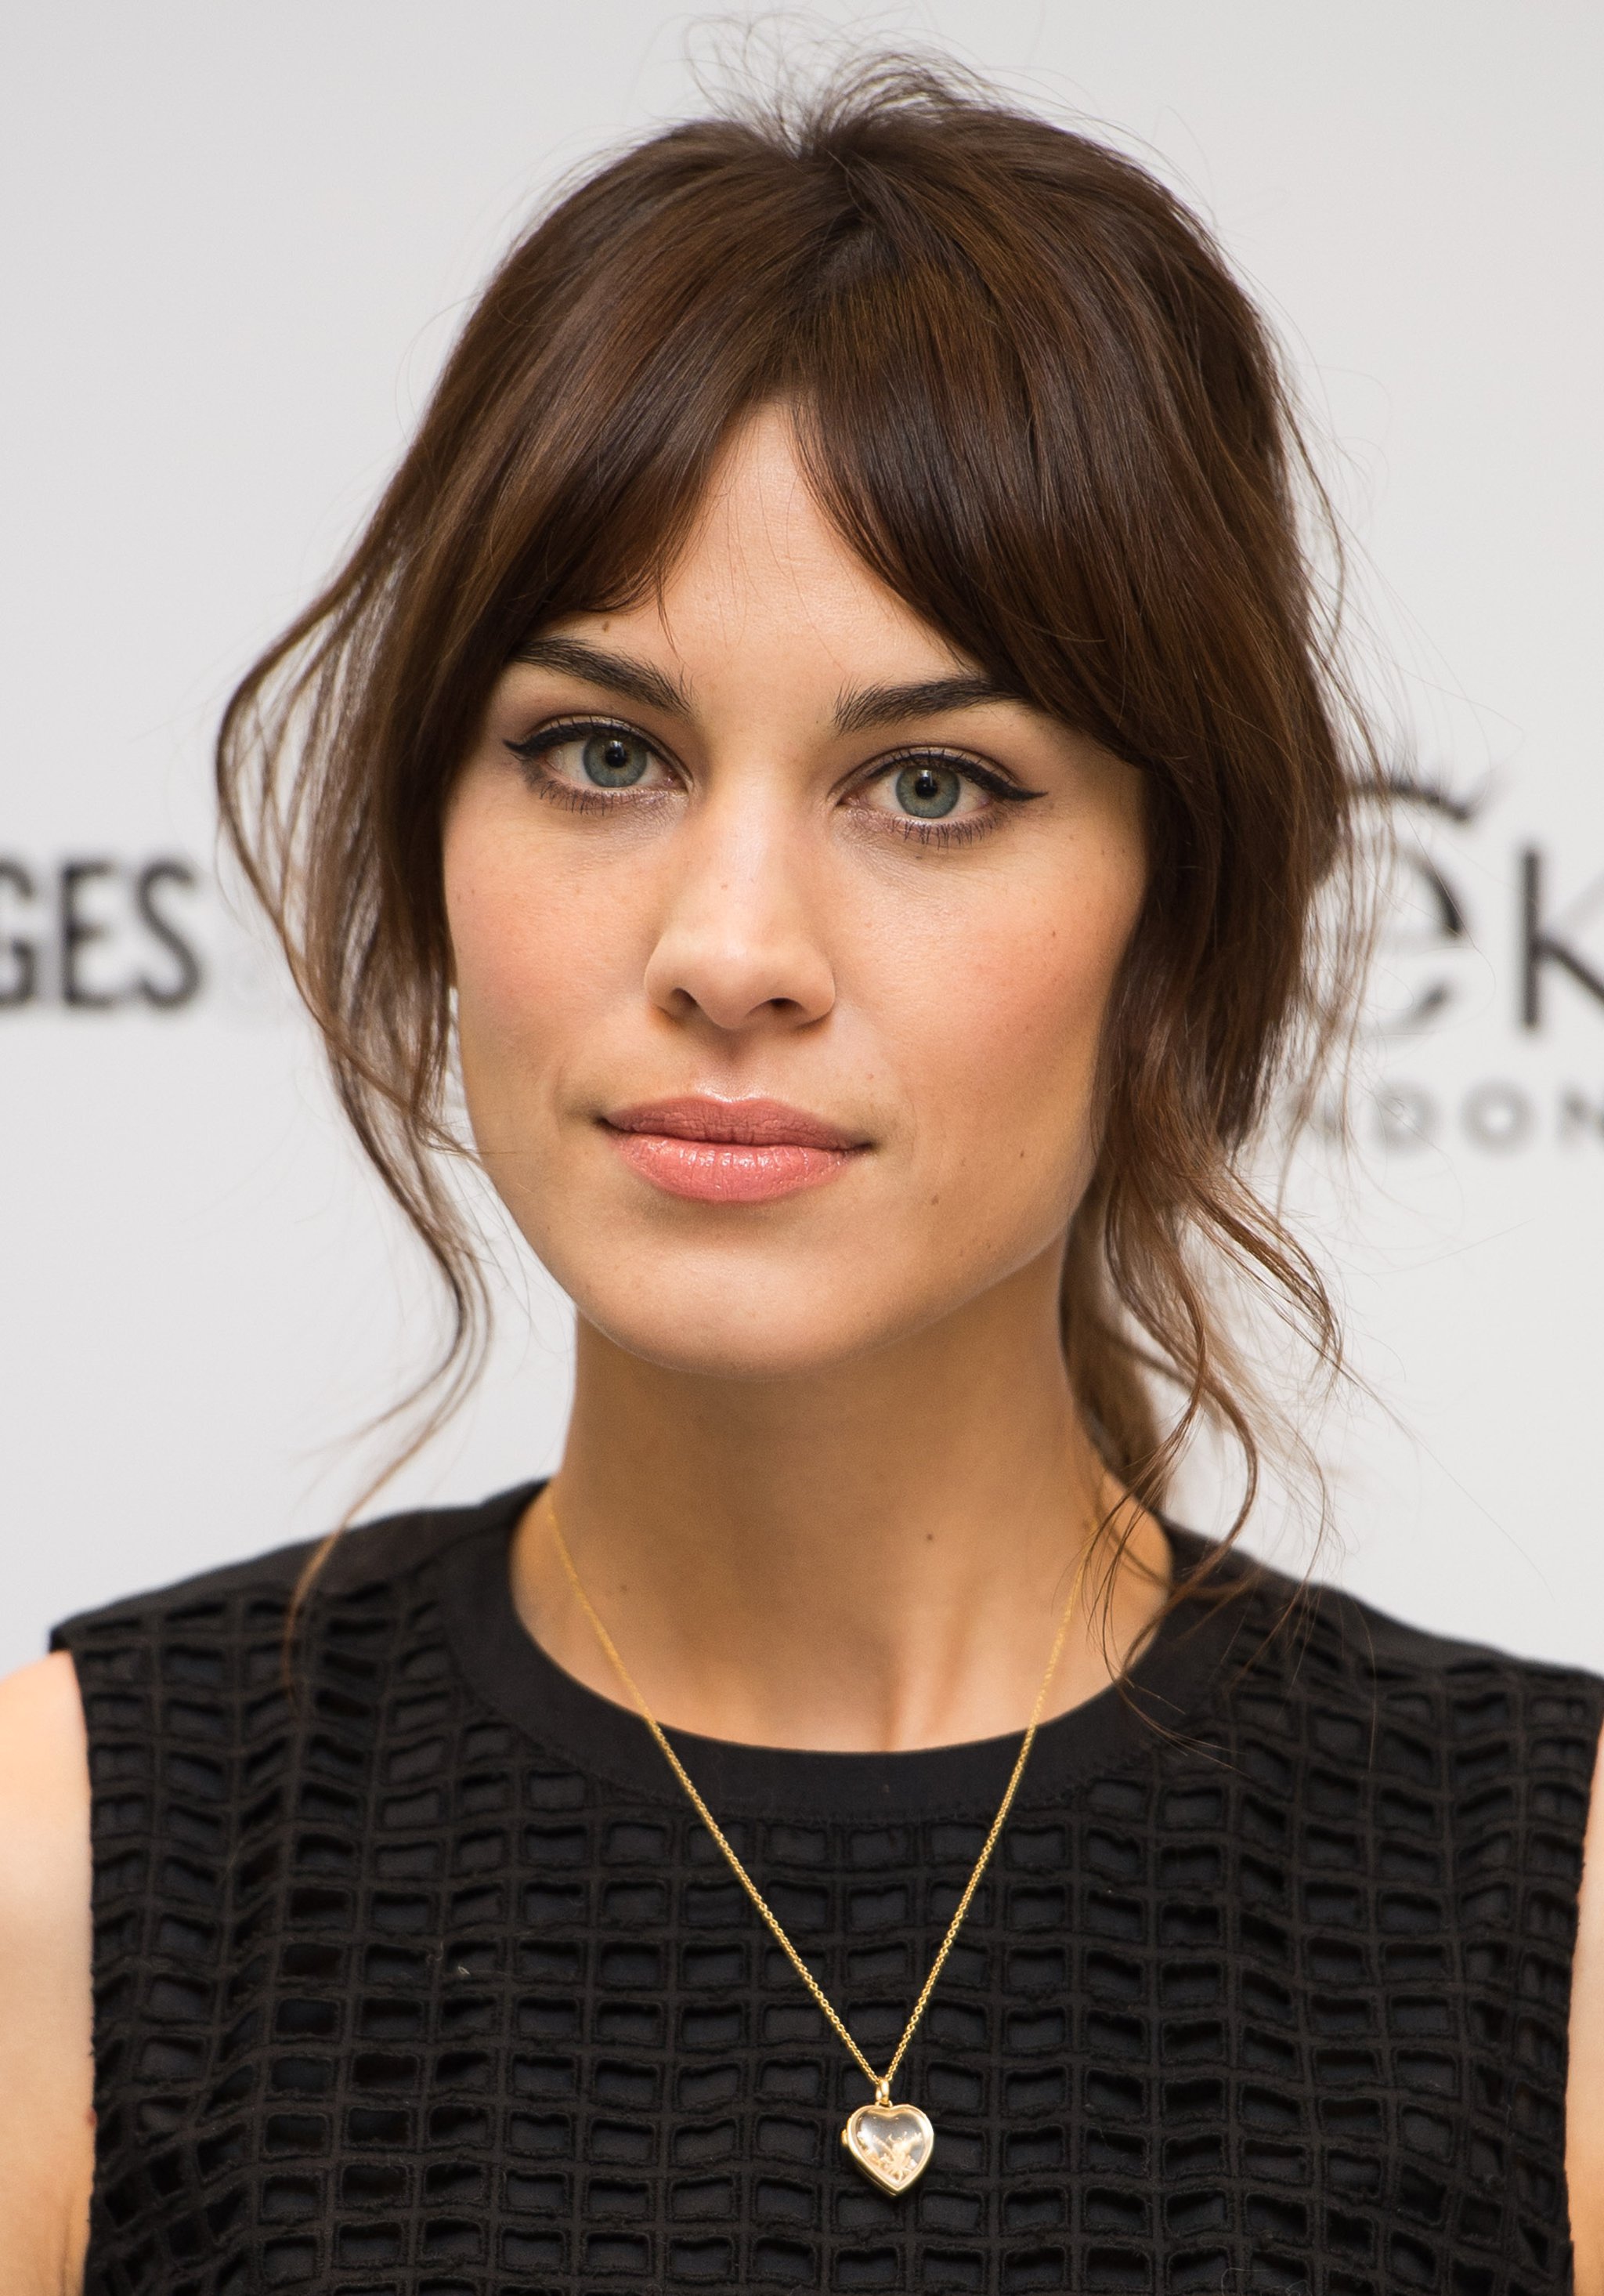 Hairstyles For Long Faces Bangs